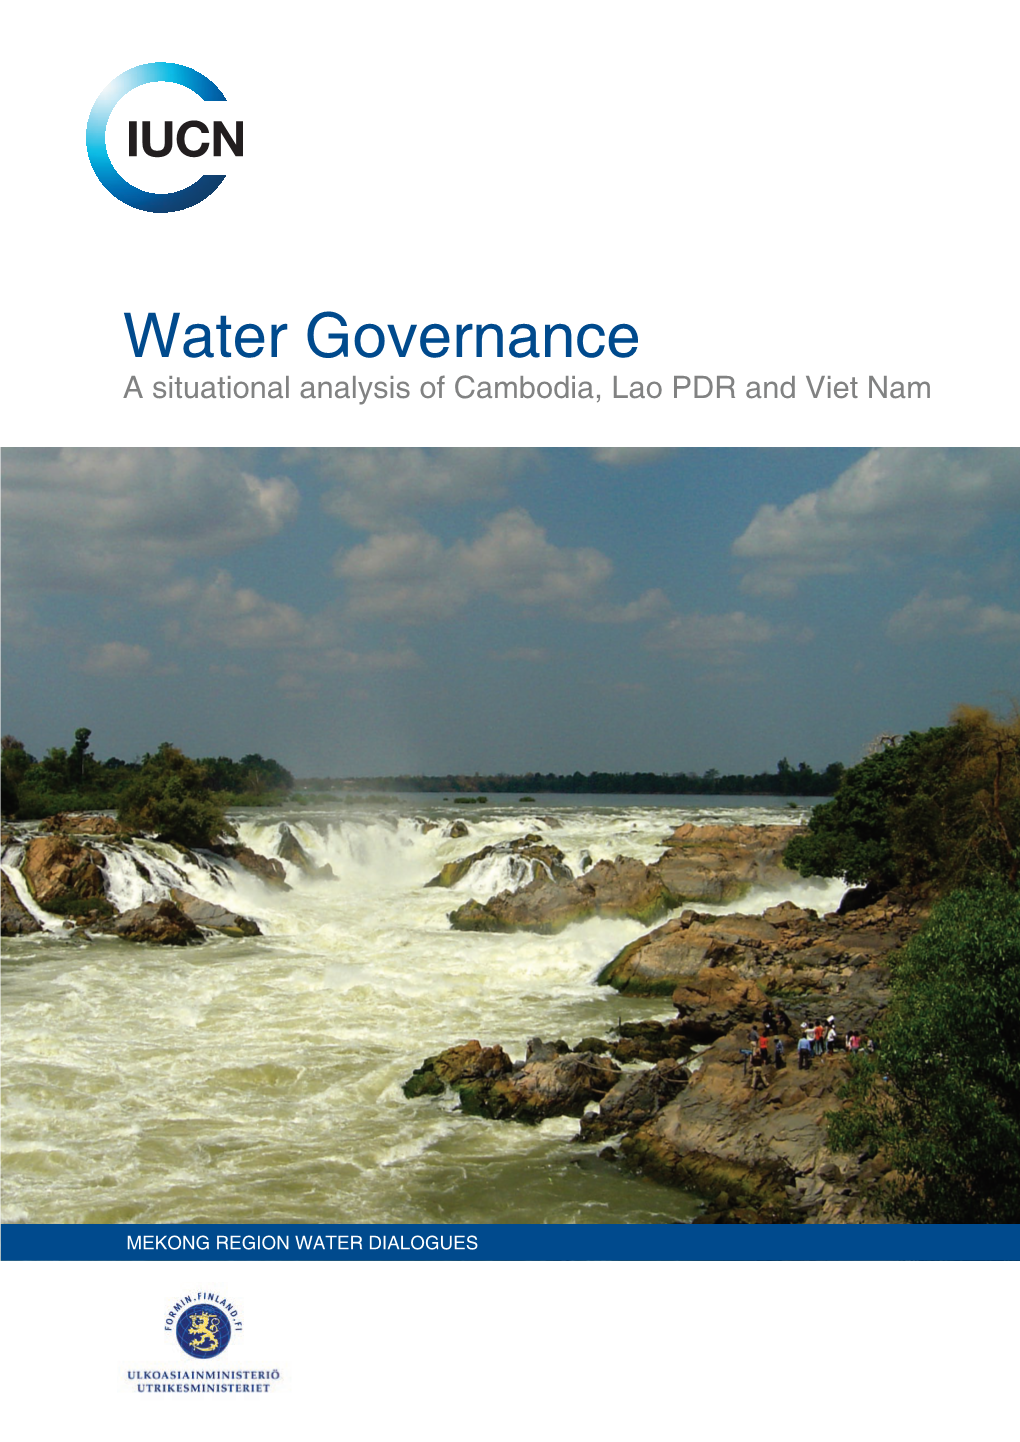 Water Governance a Situational Analysis of Cambodia, Lao PDR and Viet Nam